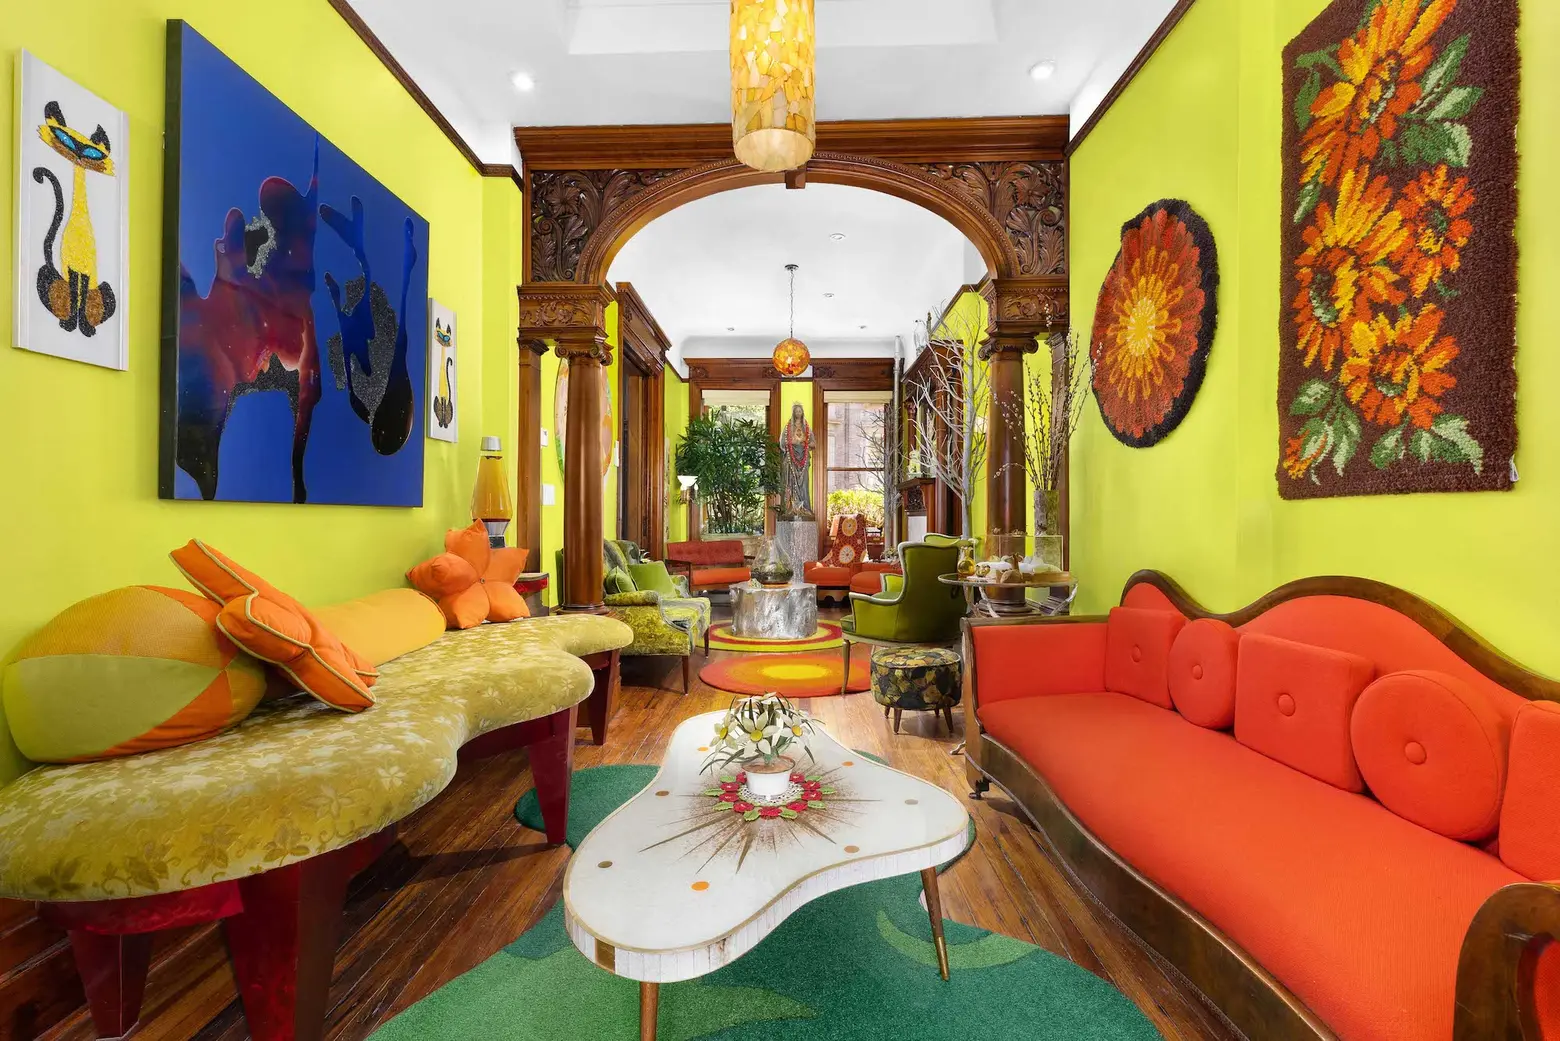 Vibrant colors & a creative vibe complement historic details in this $3.9M Hamilton Heights townhouse